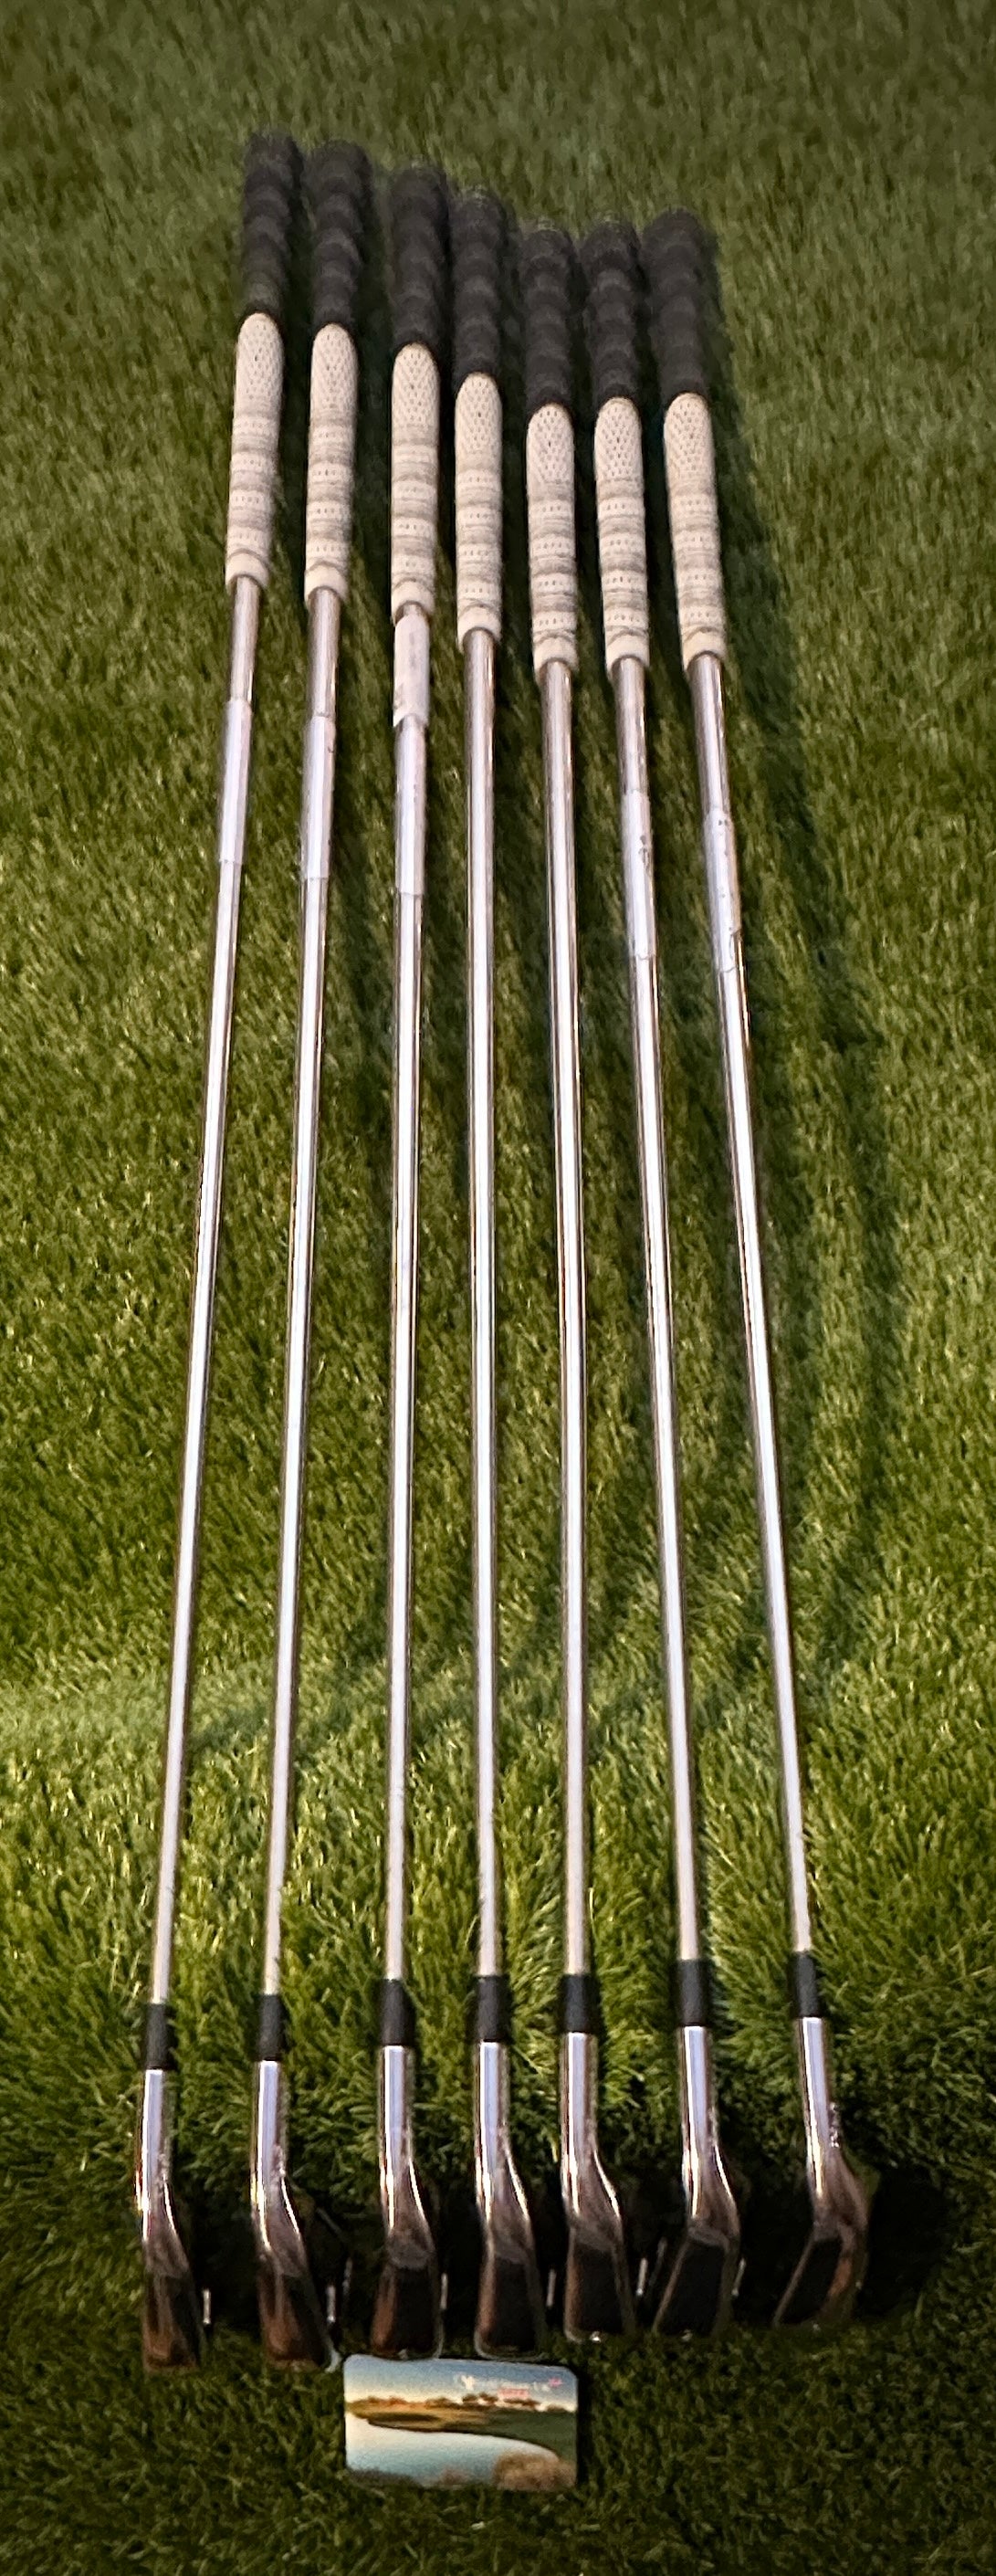 TaylorMade Forged Tour Preferred CB Stunning 4-PW Iron Set